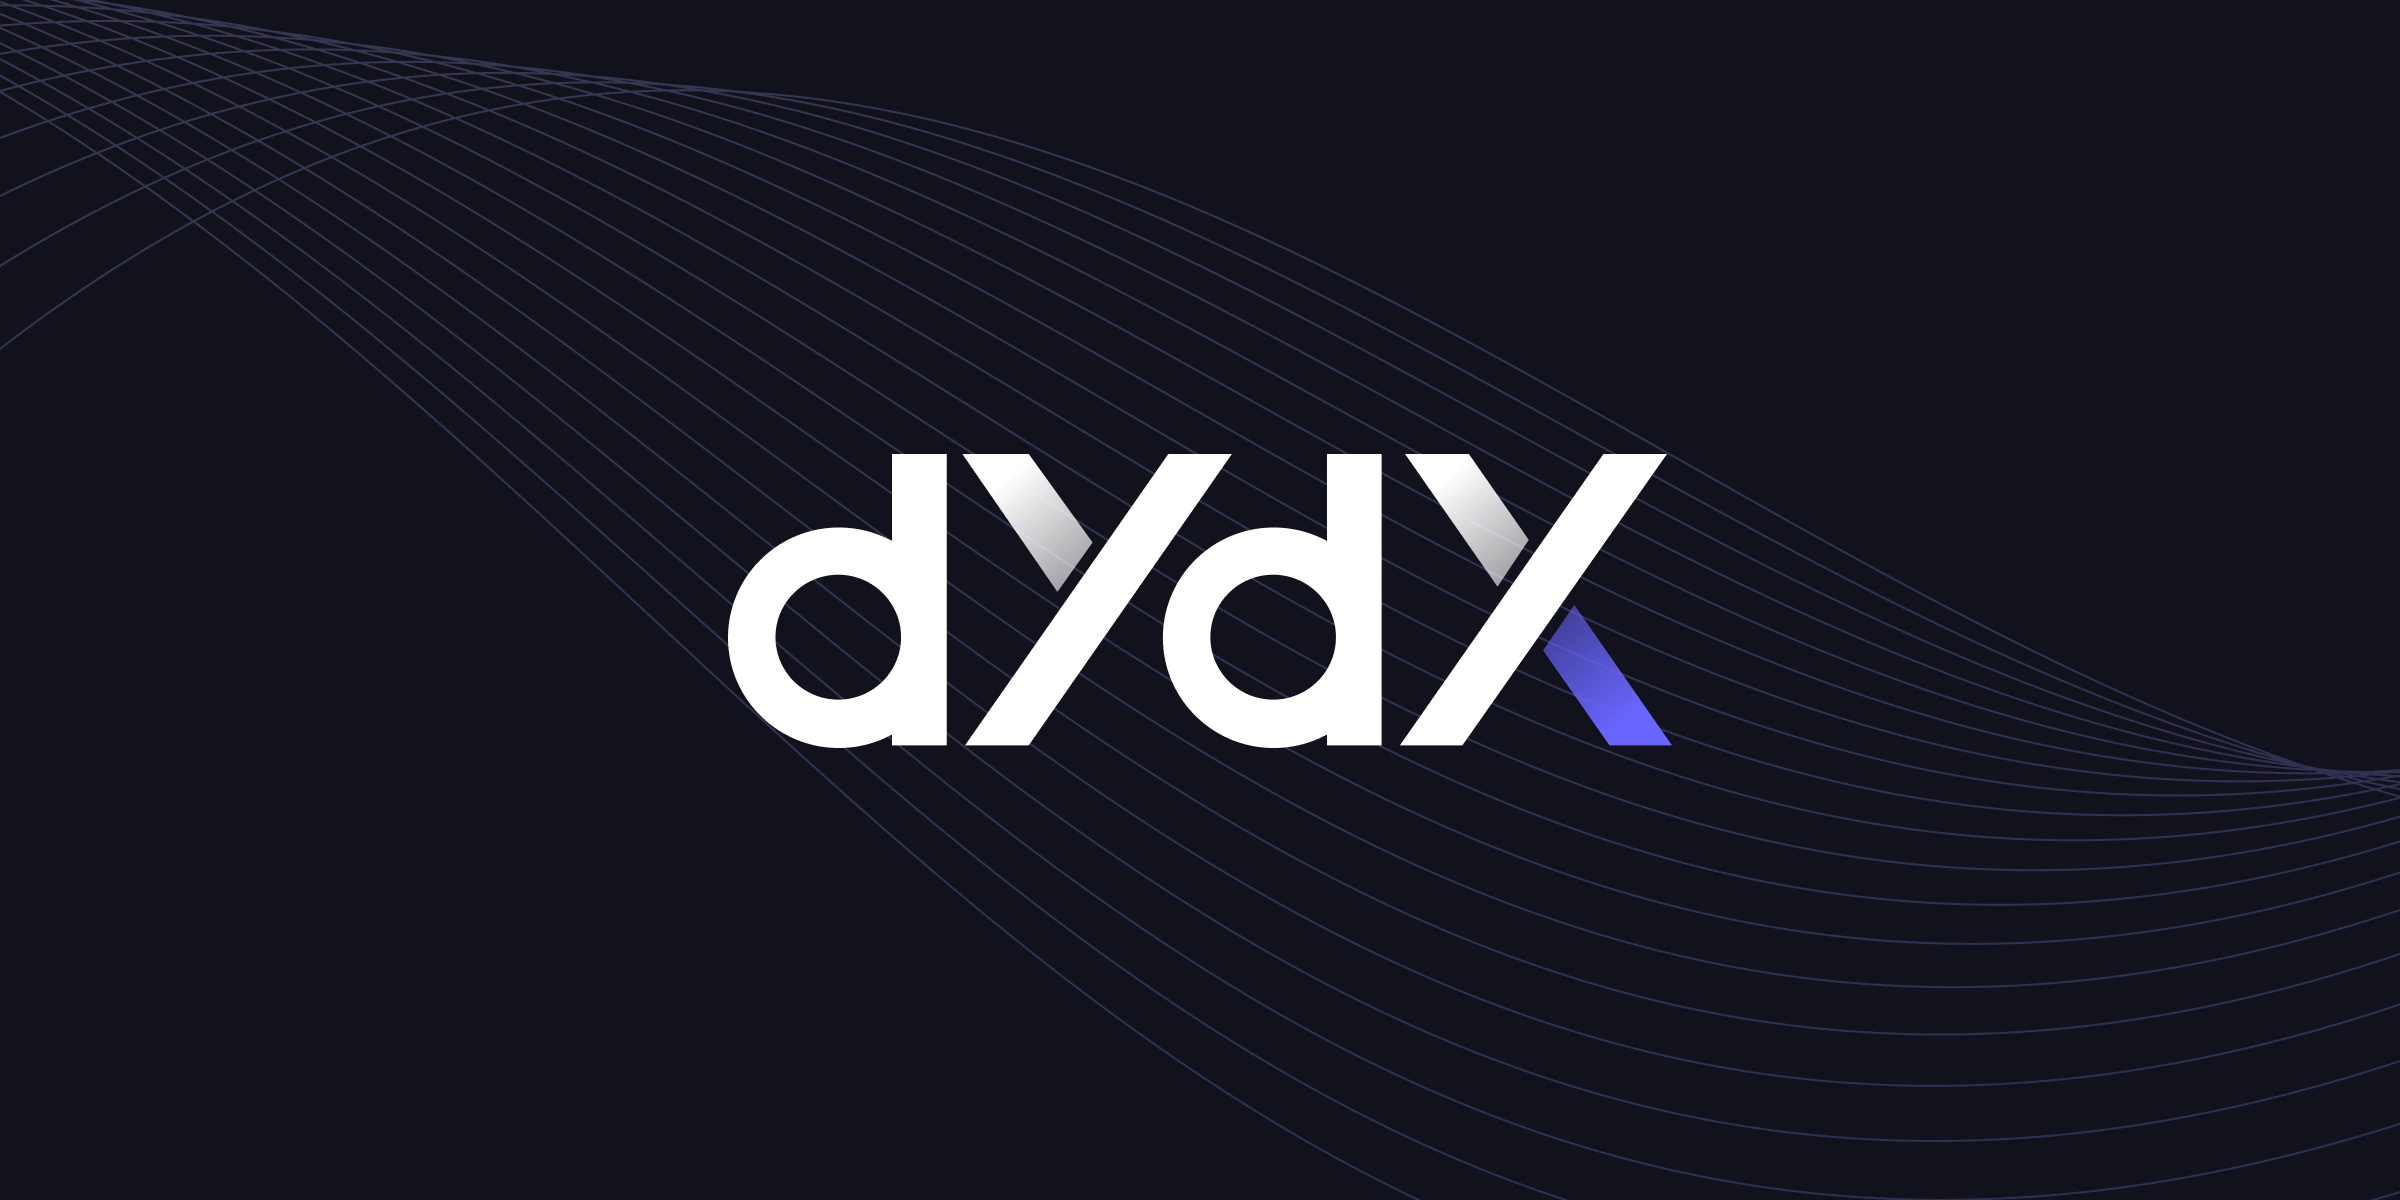 dYdX - Download logo and other brand assets.